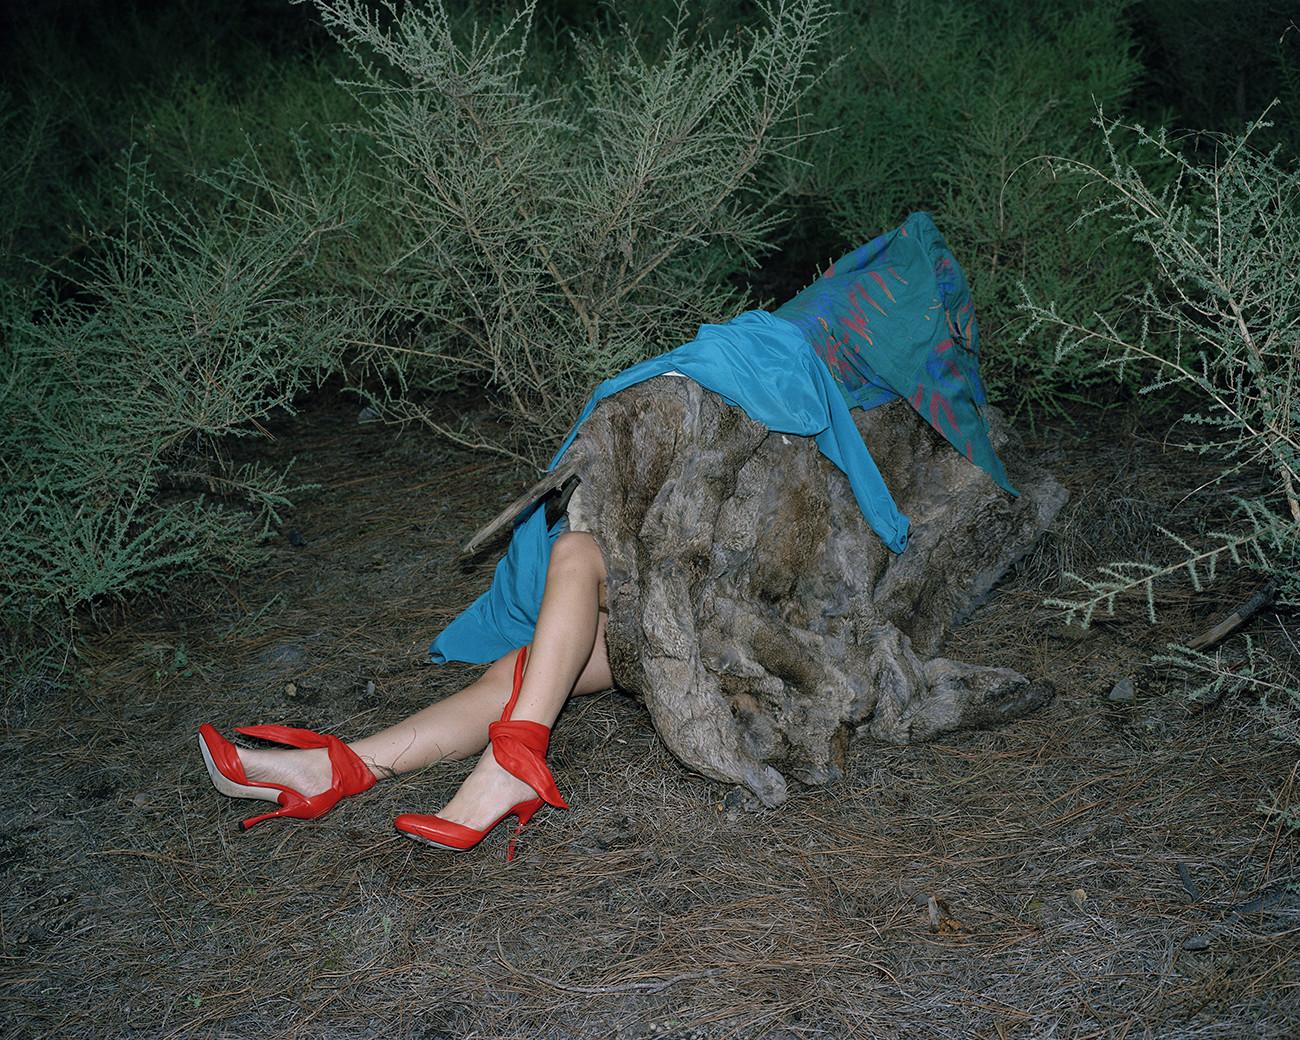 Viviane Sassen's 'In and Out of Fashion